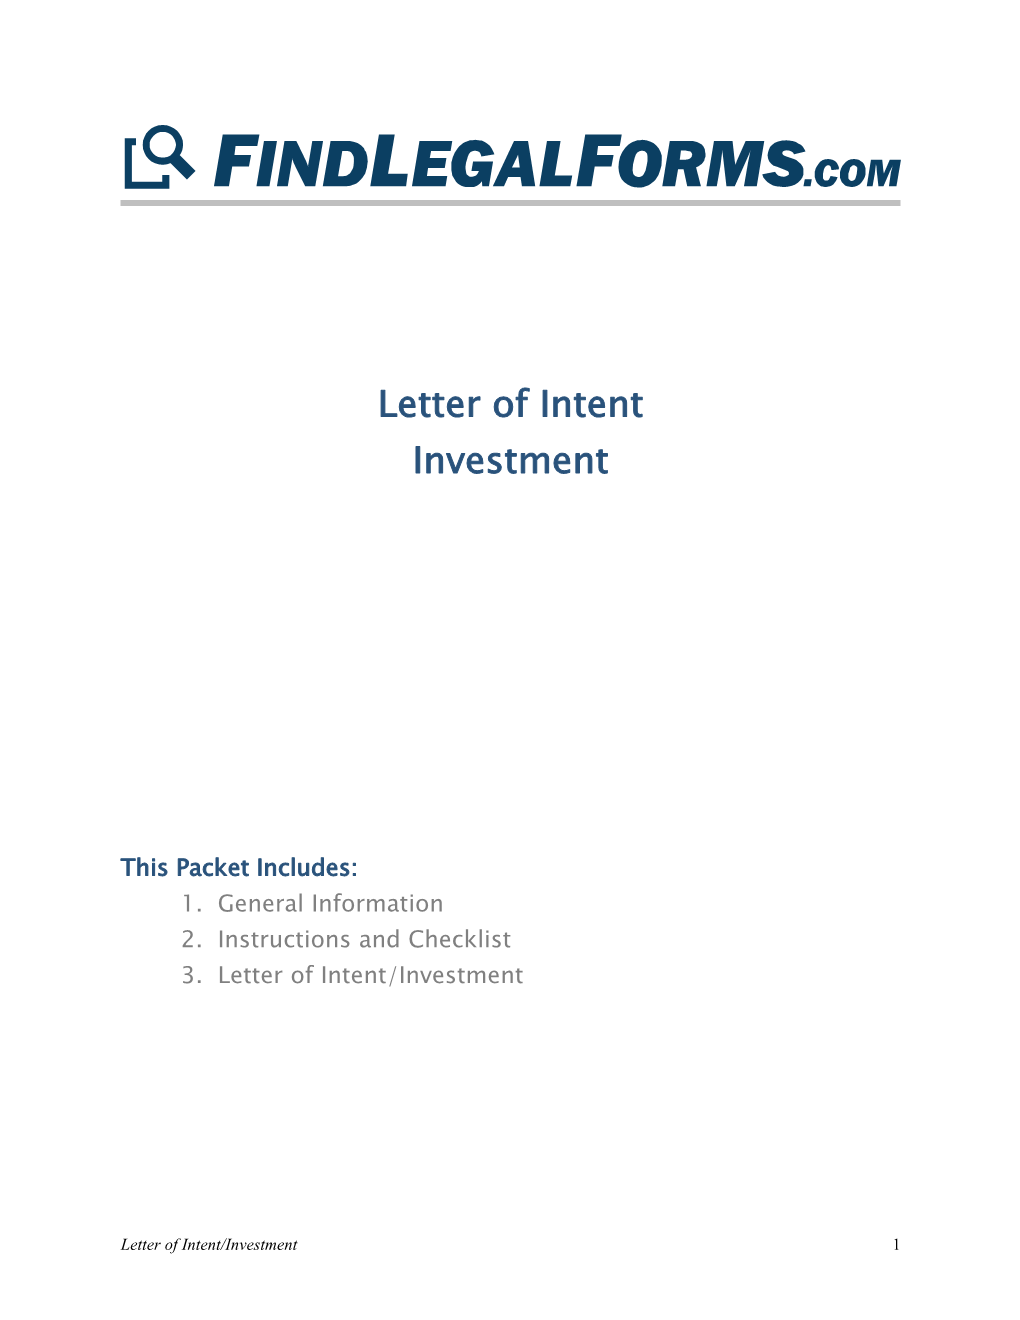 Letter of Intent/Investment